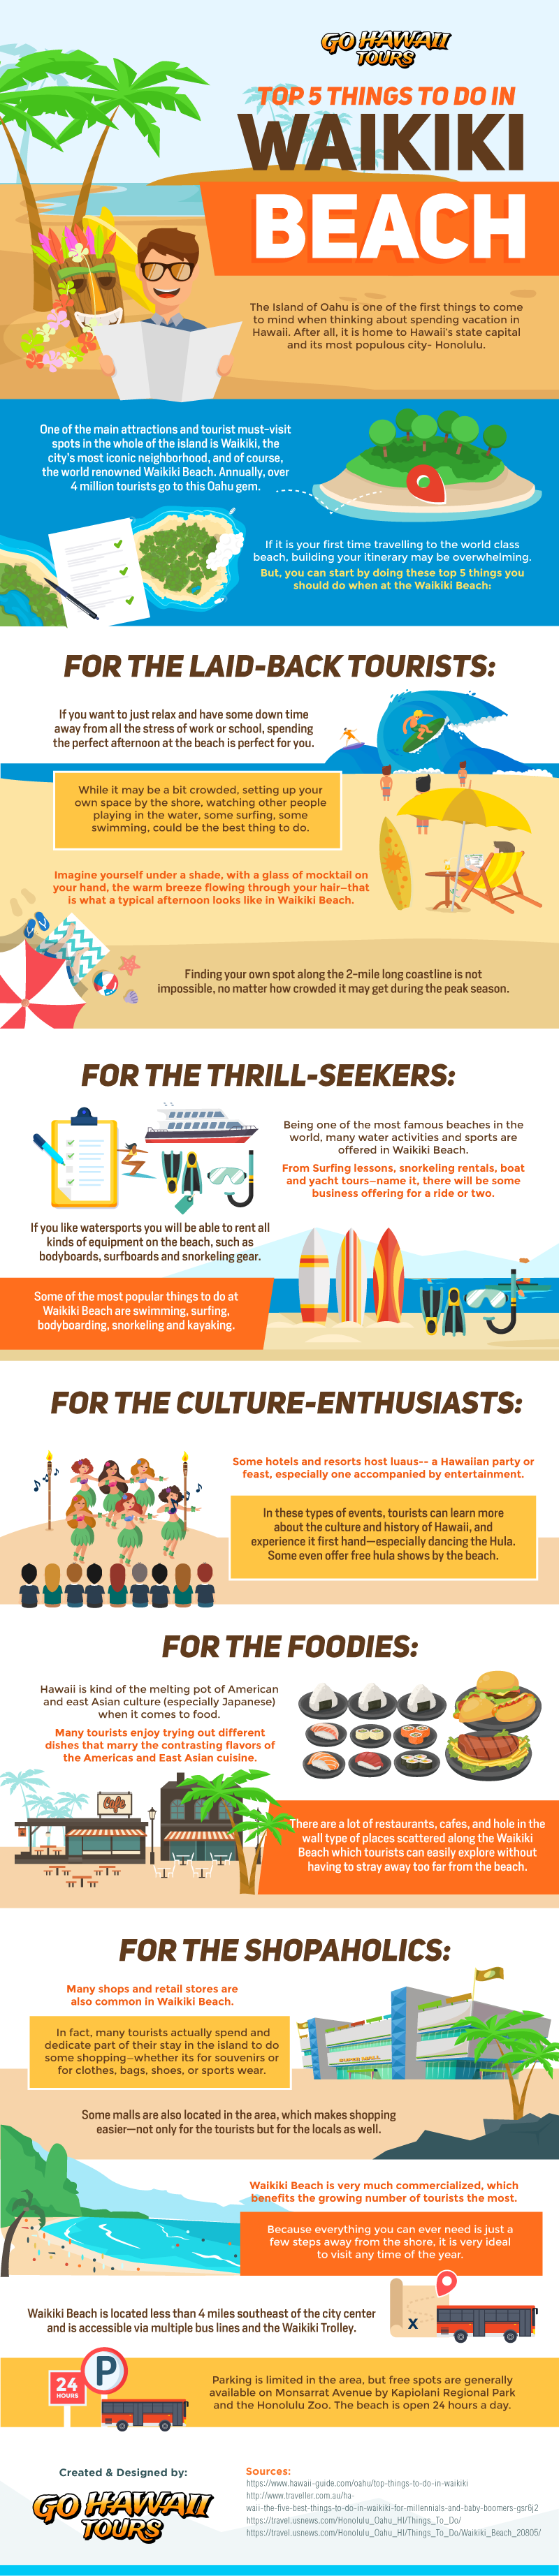 Top 5 Things To Do In Waikiki Beach Infographic Image